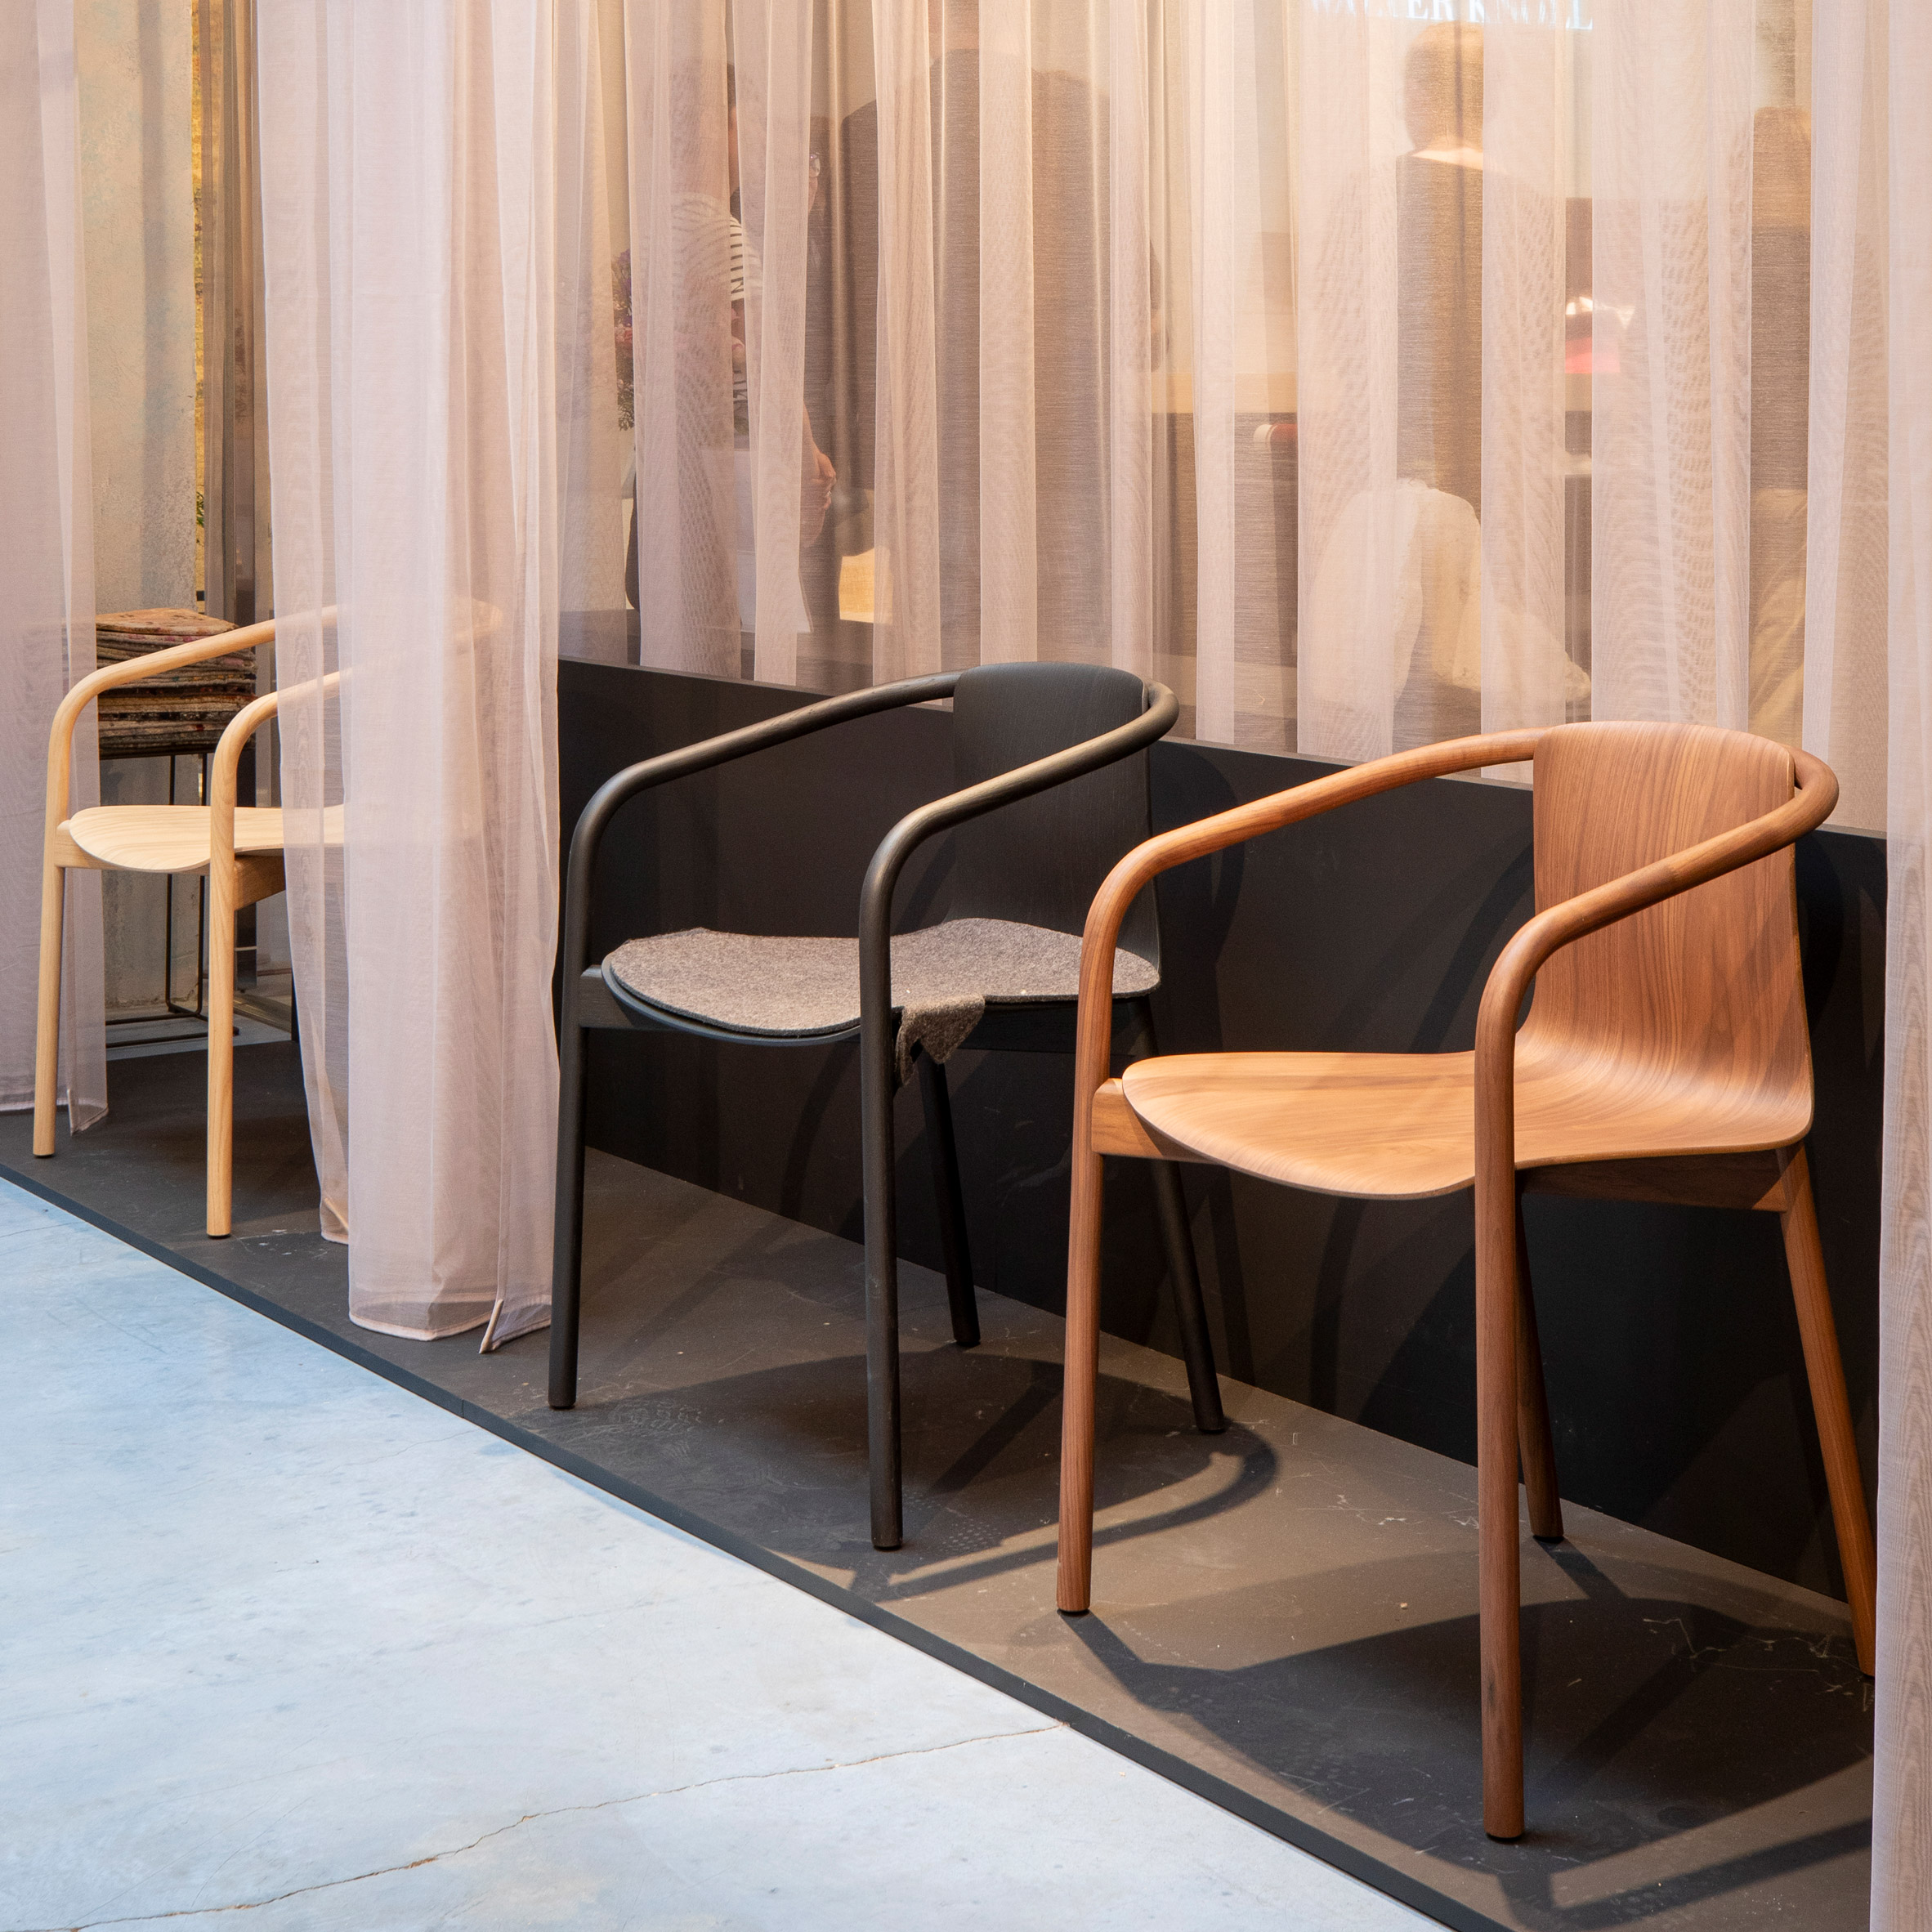 Wooden Osuu chairs by Foster + Partners